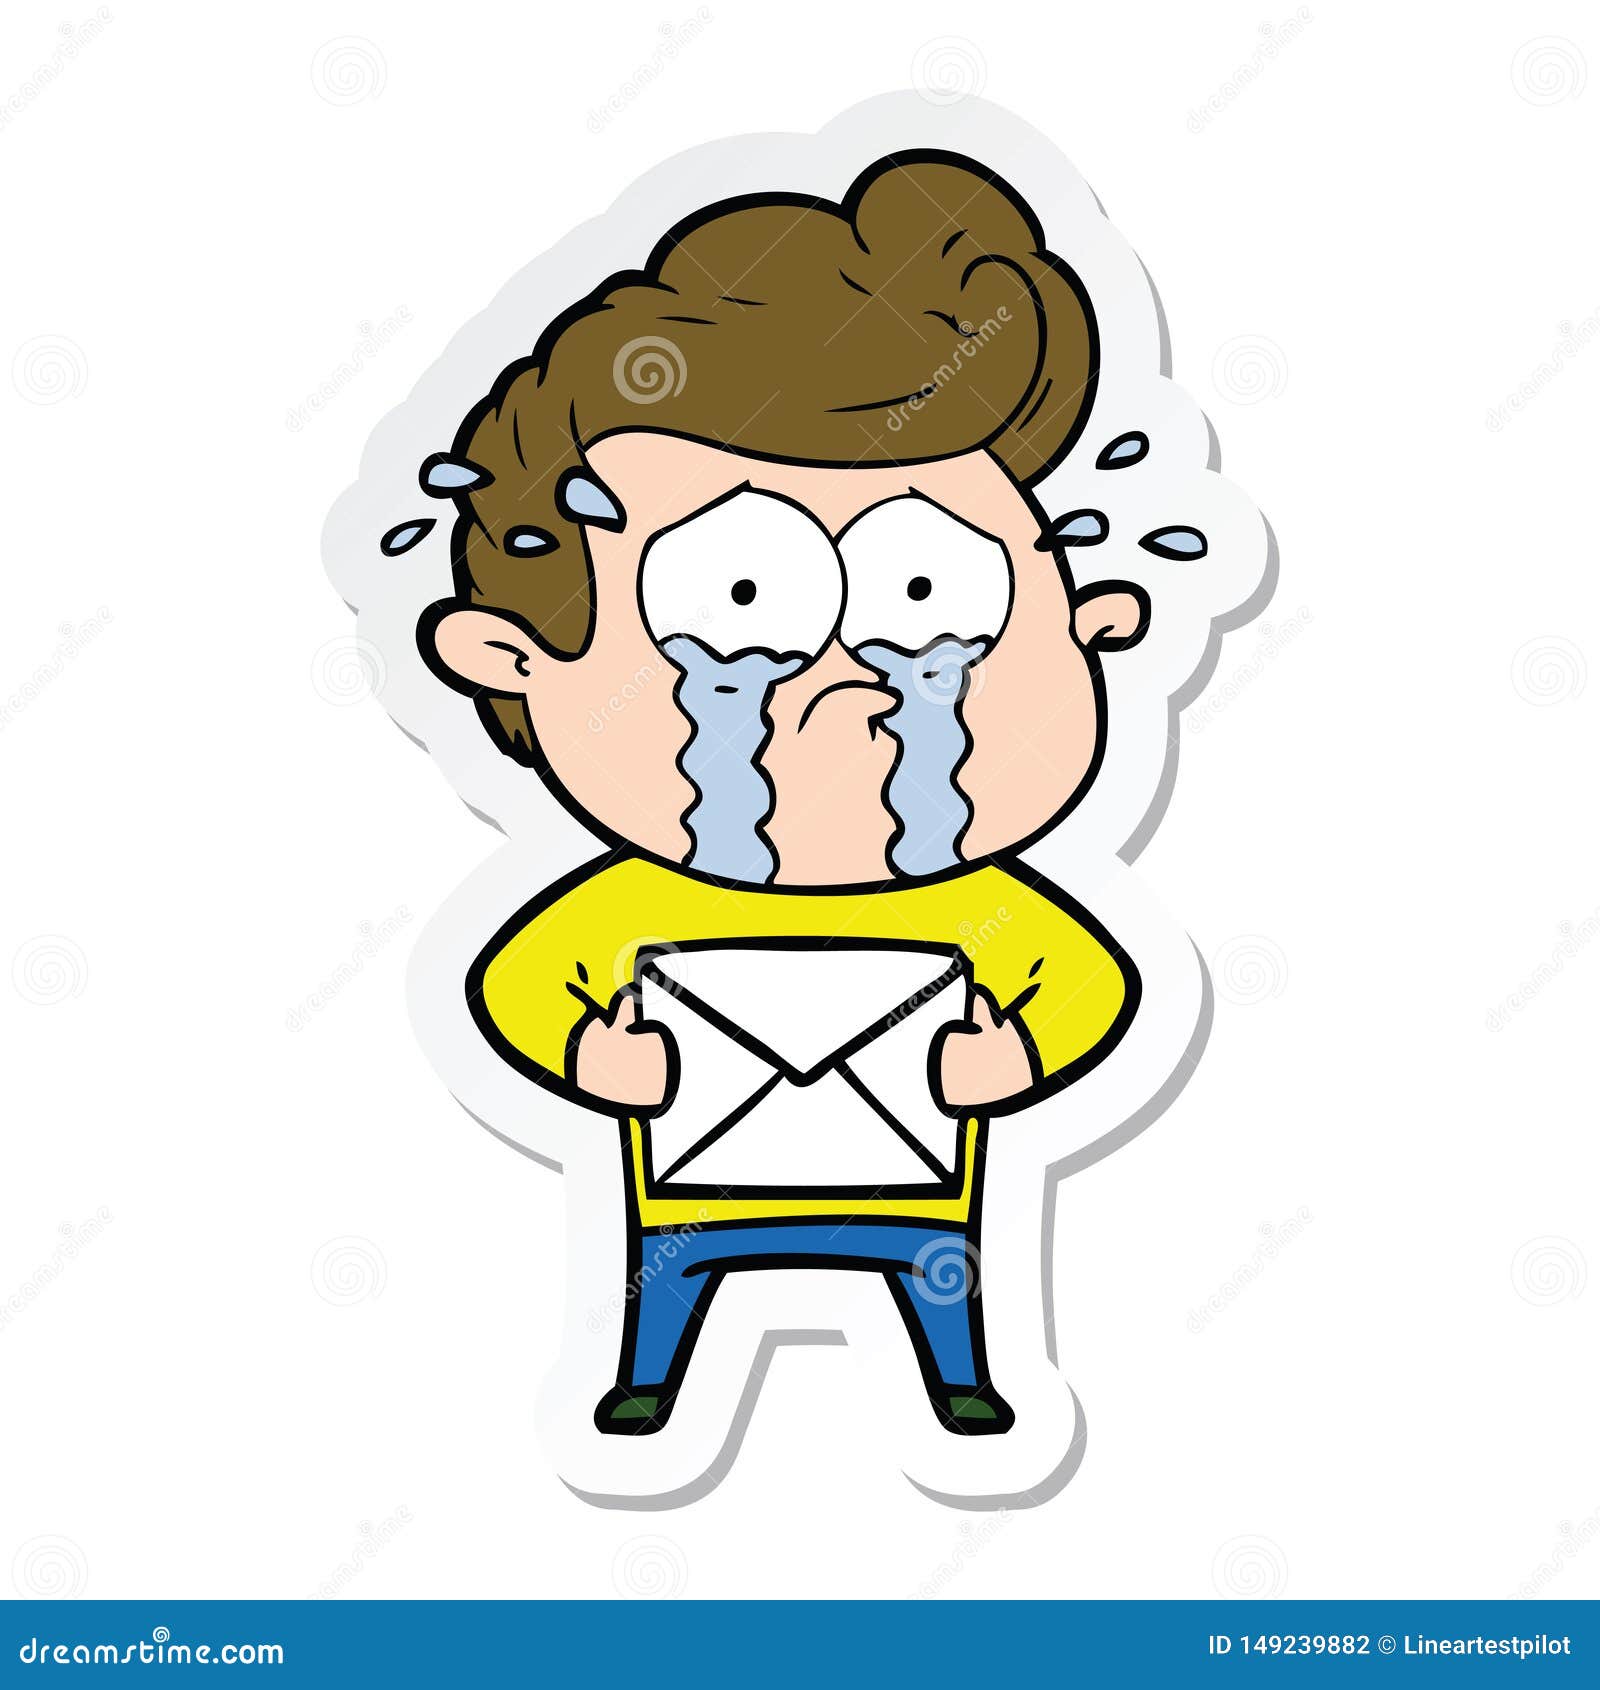 Man Male Boy Crying Tears Upset Sad Cartoon Sticker Stick Icon Decal Label  Drawing Illustration Retro Doodle Freehand Free Hand Drawn Quirky Art  Artwork Funny Character Stock Illustrations – 175 Man Male